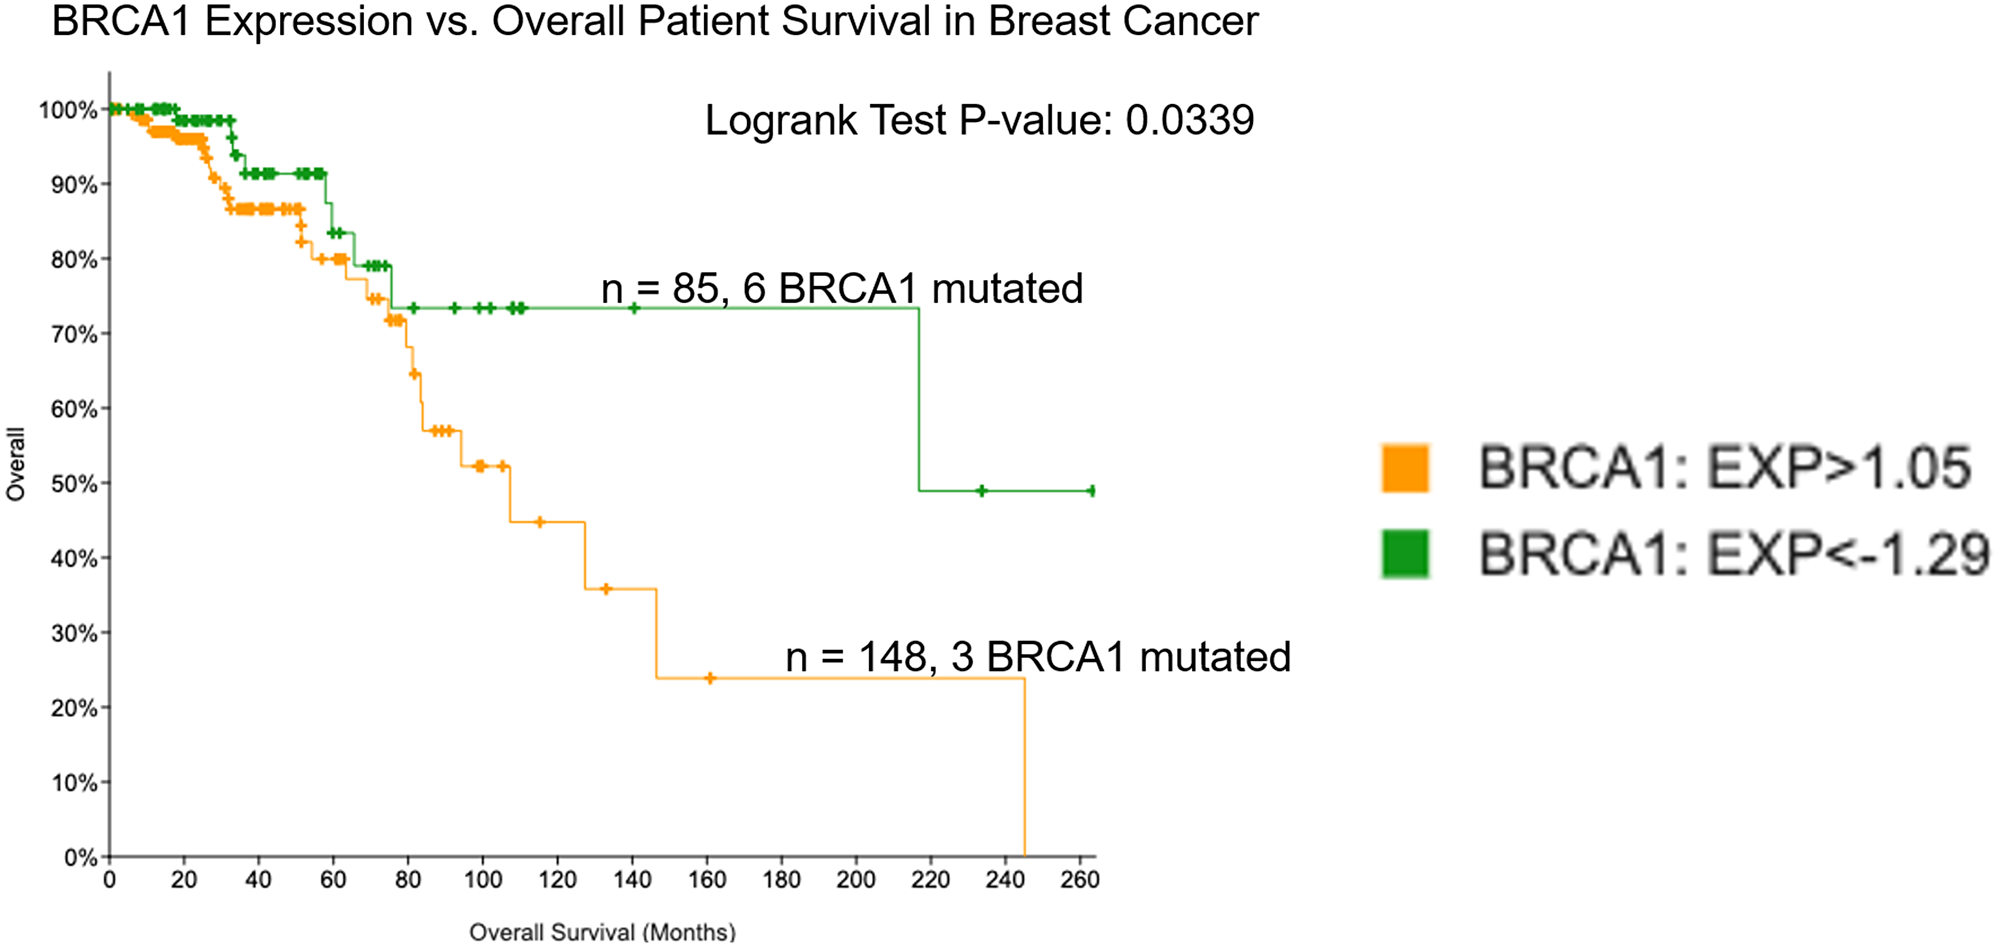 Low expression of BRCA1 in breast cancer correlates with improved overall survival.